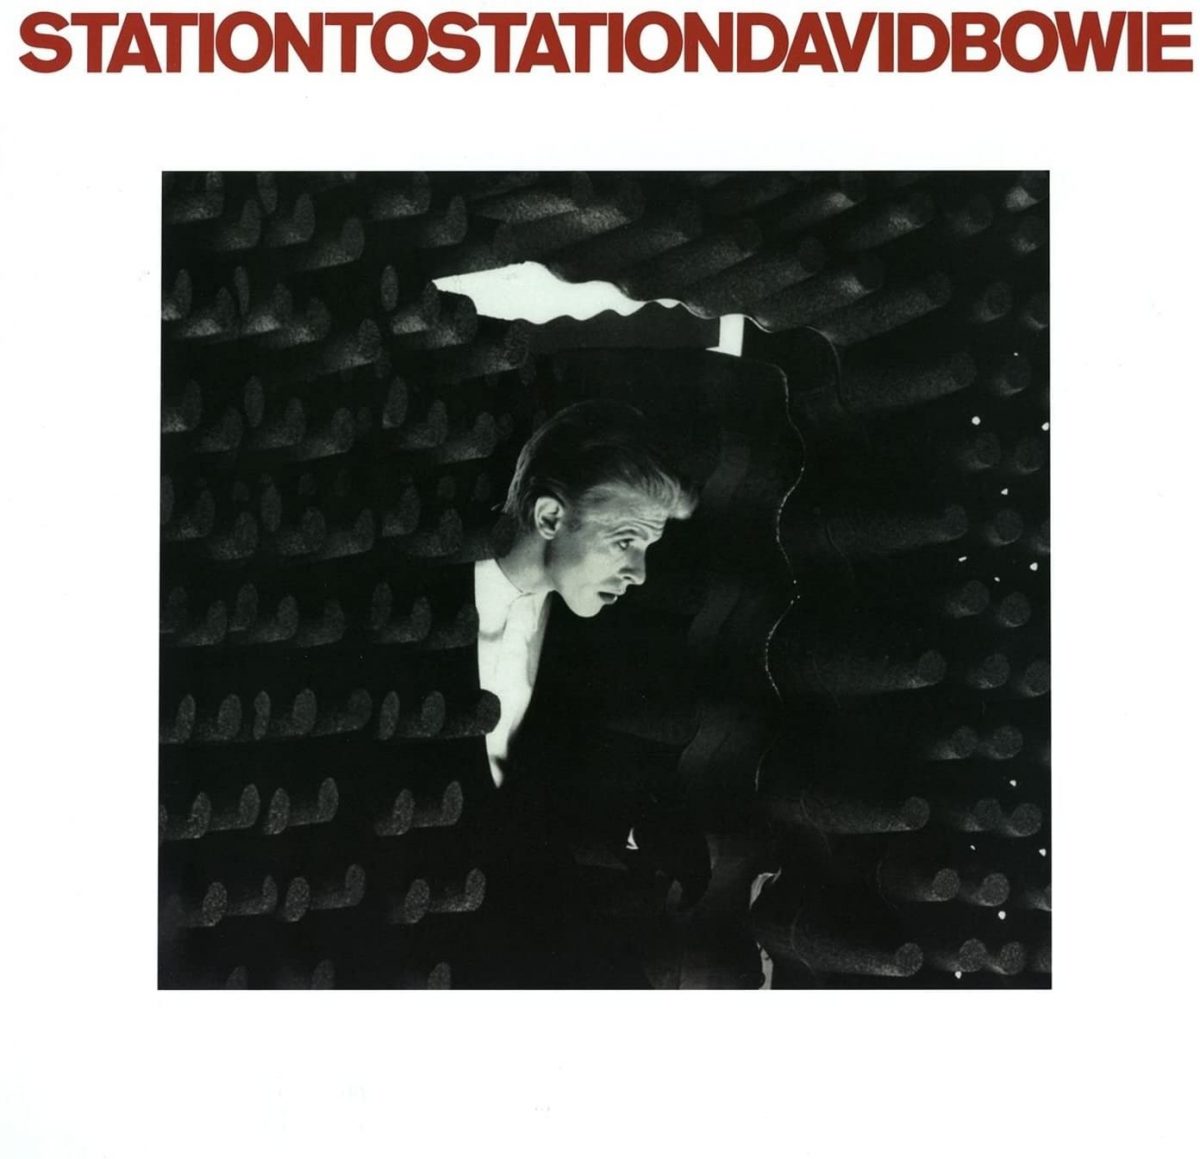 station-bowie